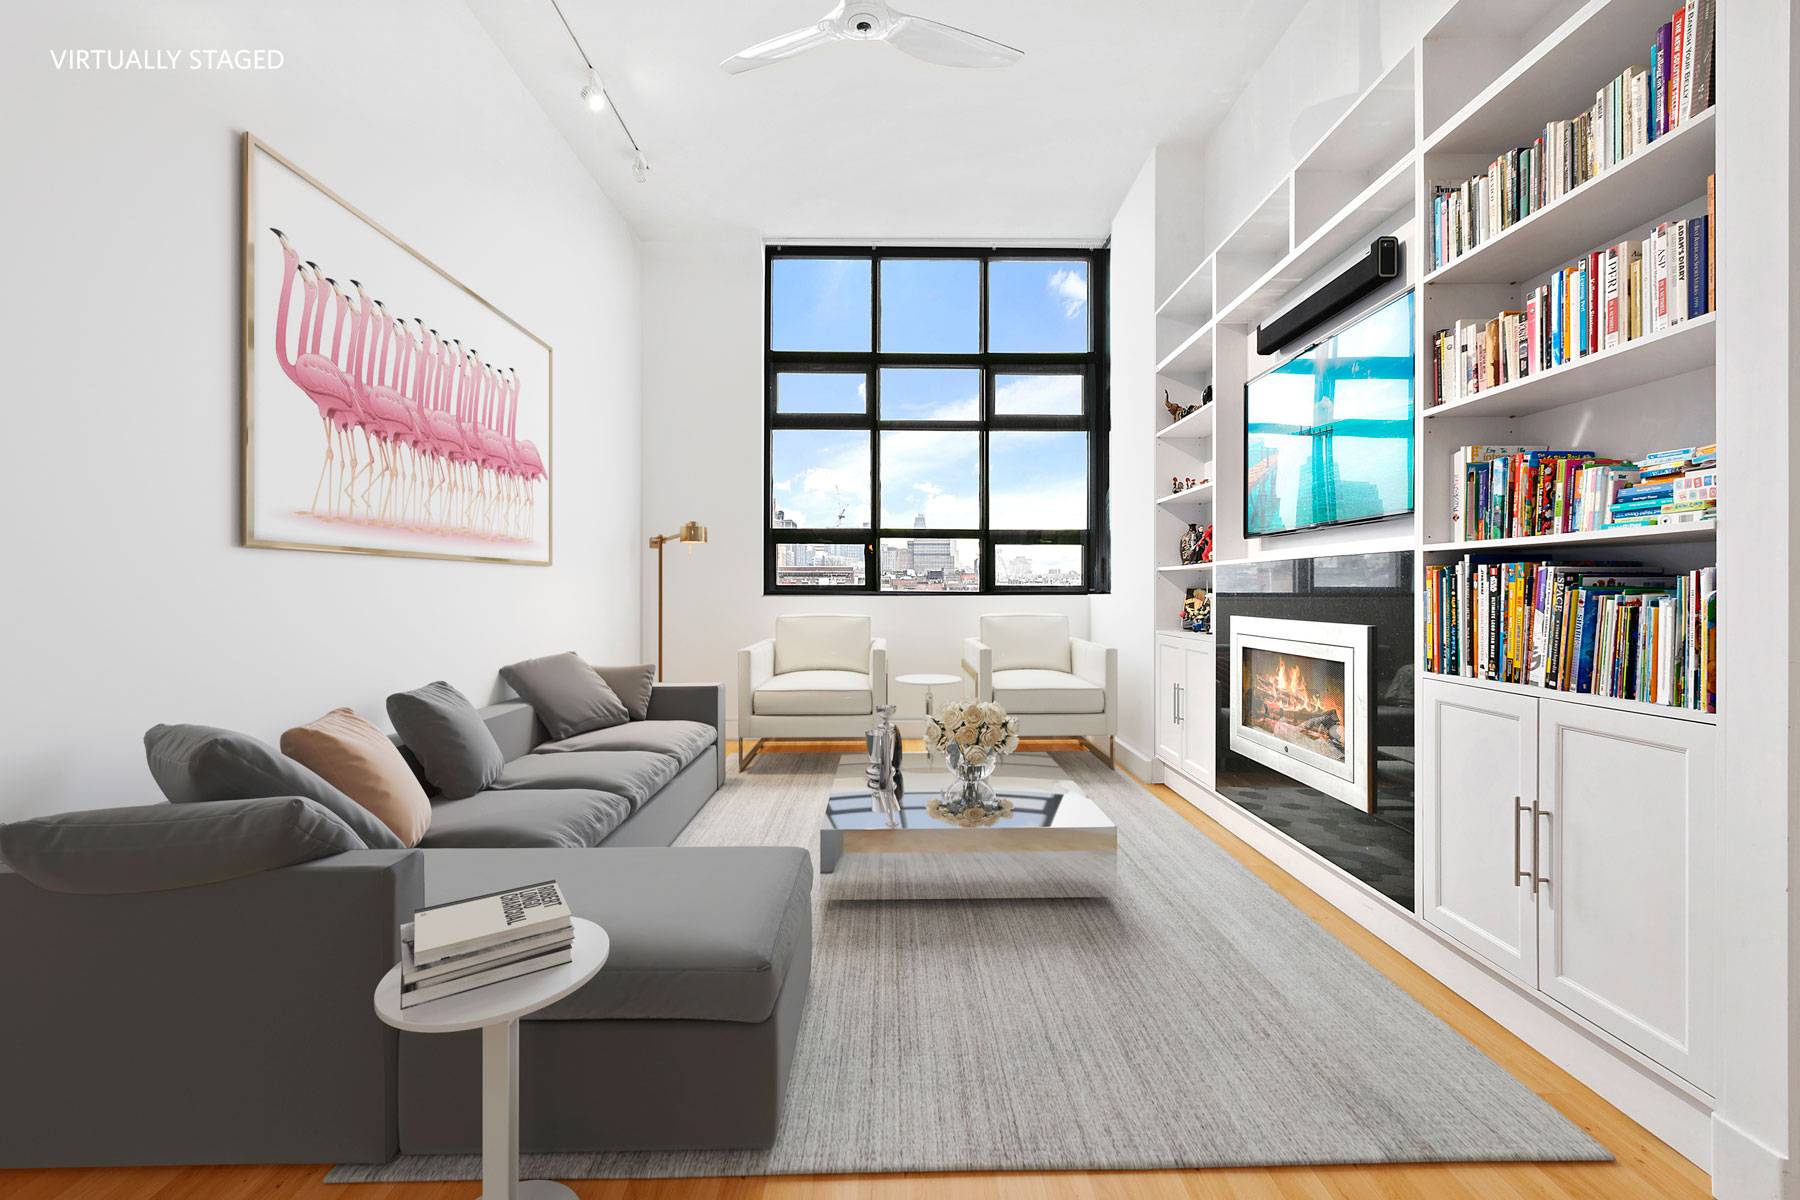 This beautiful 1, 847 SF loft space is currently laid out as a 3BR 2BA home plus home office.